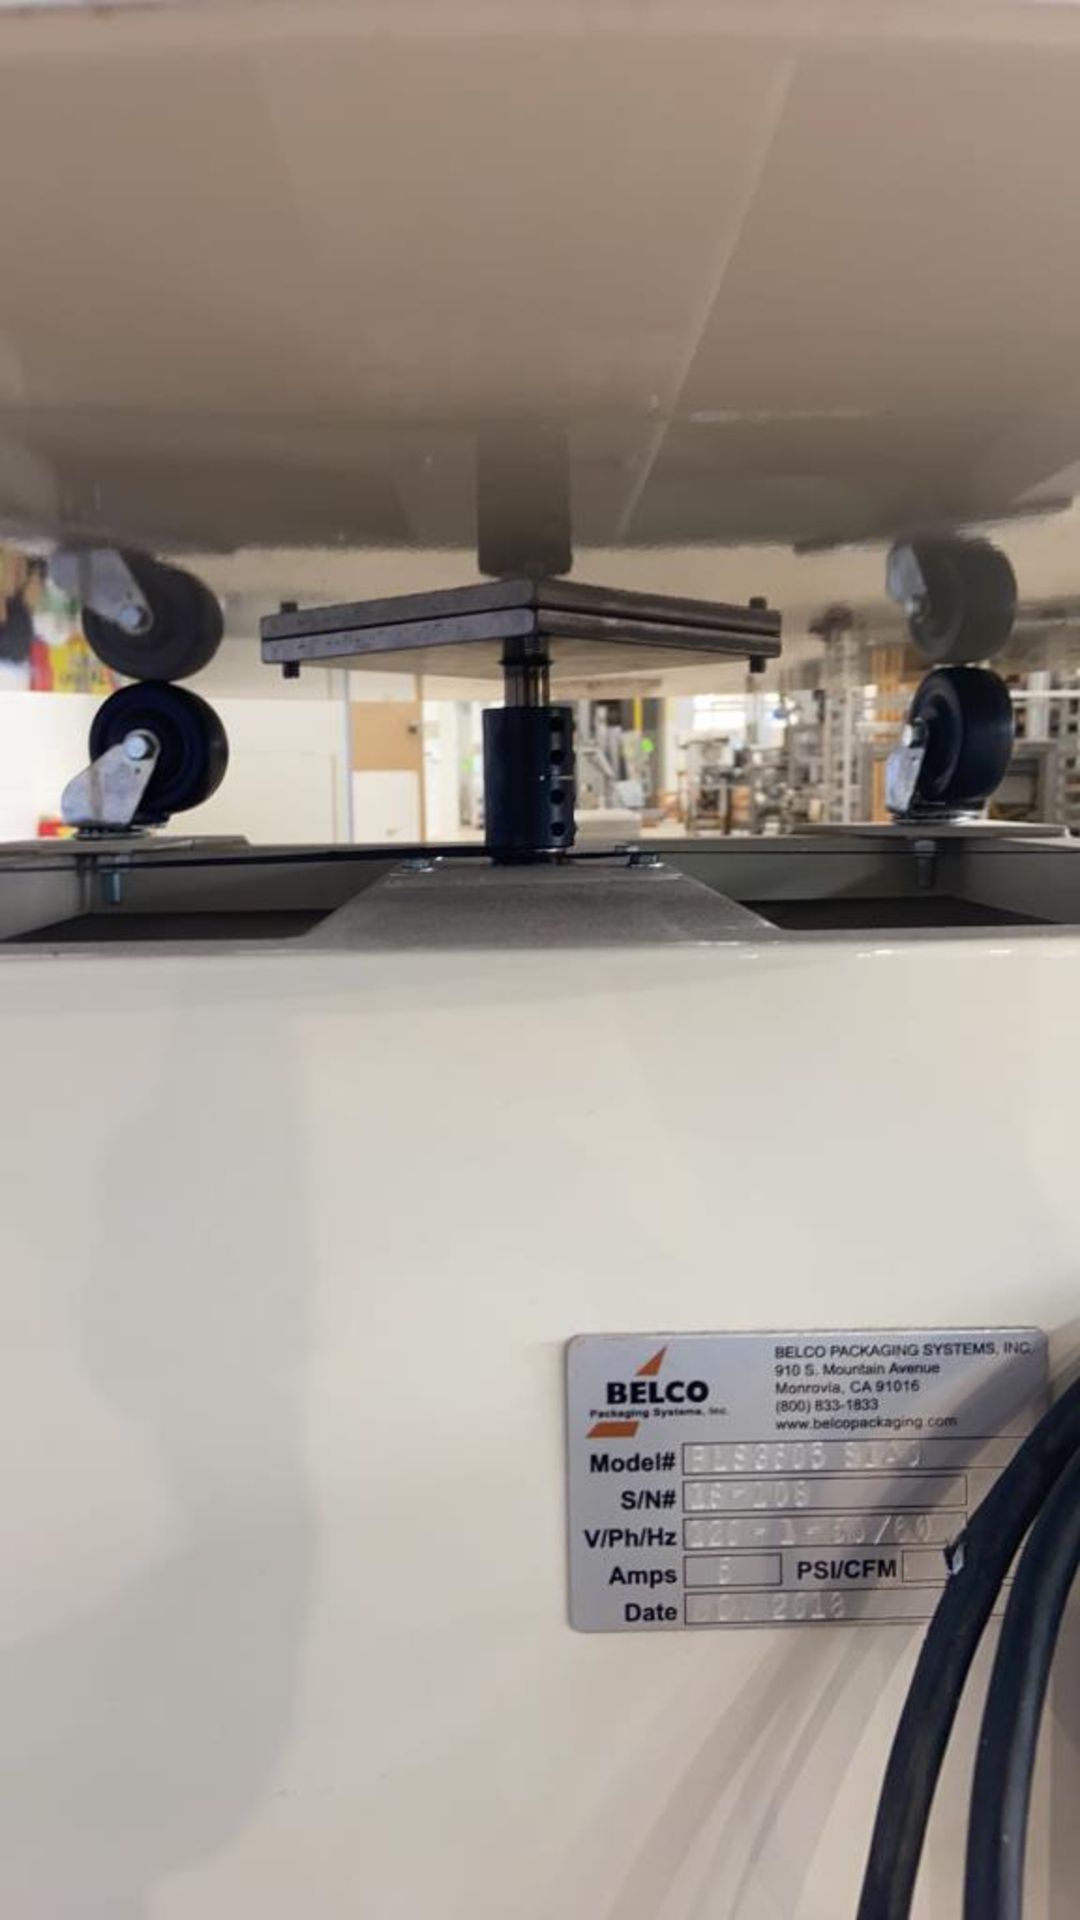 2018 Belco Packaging Systems Inc. 36" Dia.-Accumulation Table, M/N BLS3605 S1A0, S/N 18-108, 120 - Image 7 of 8